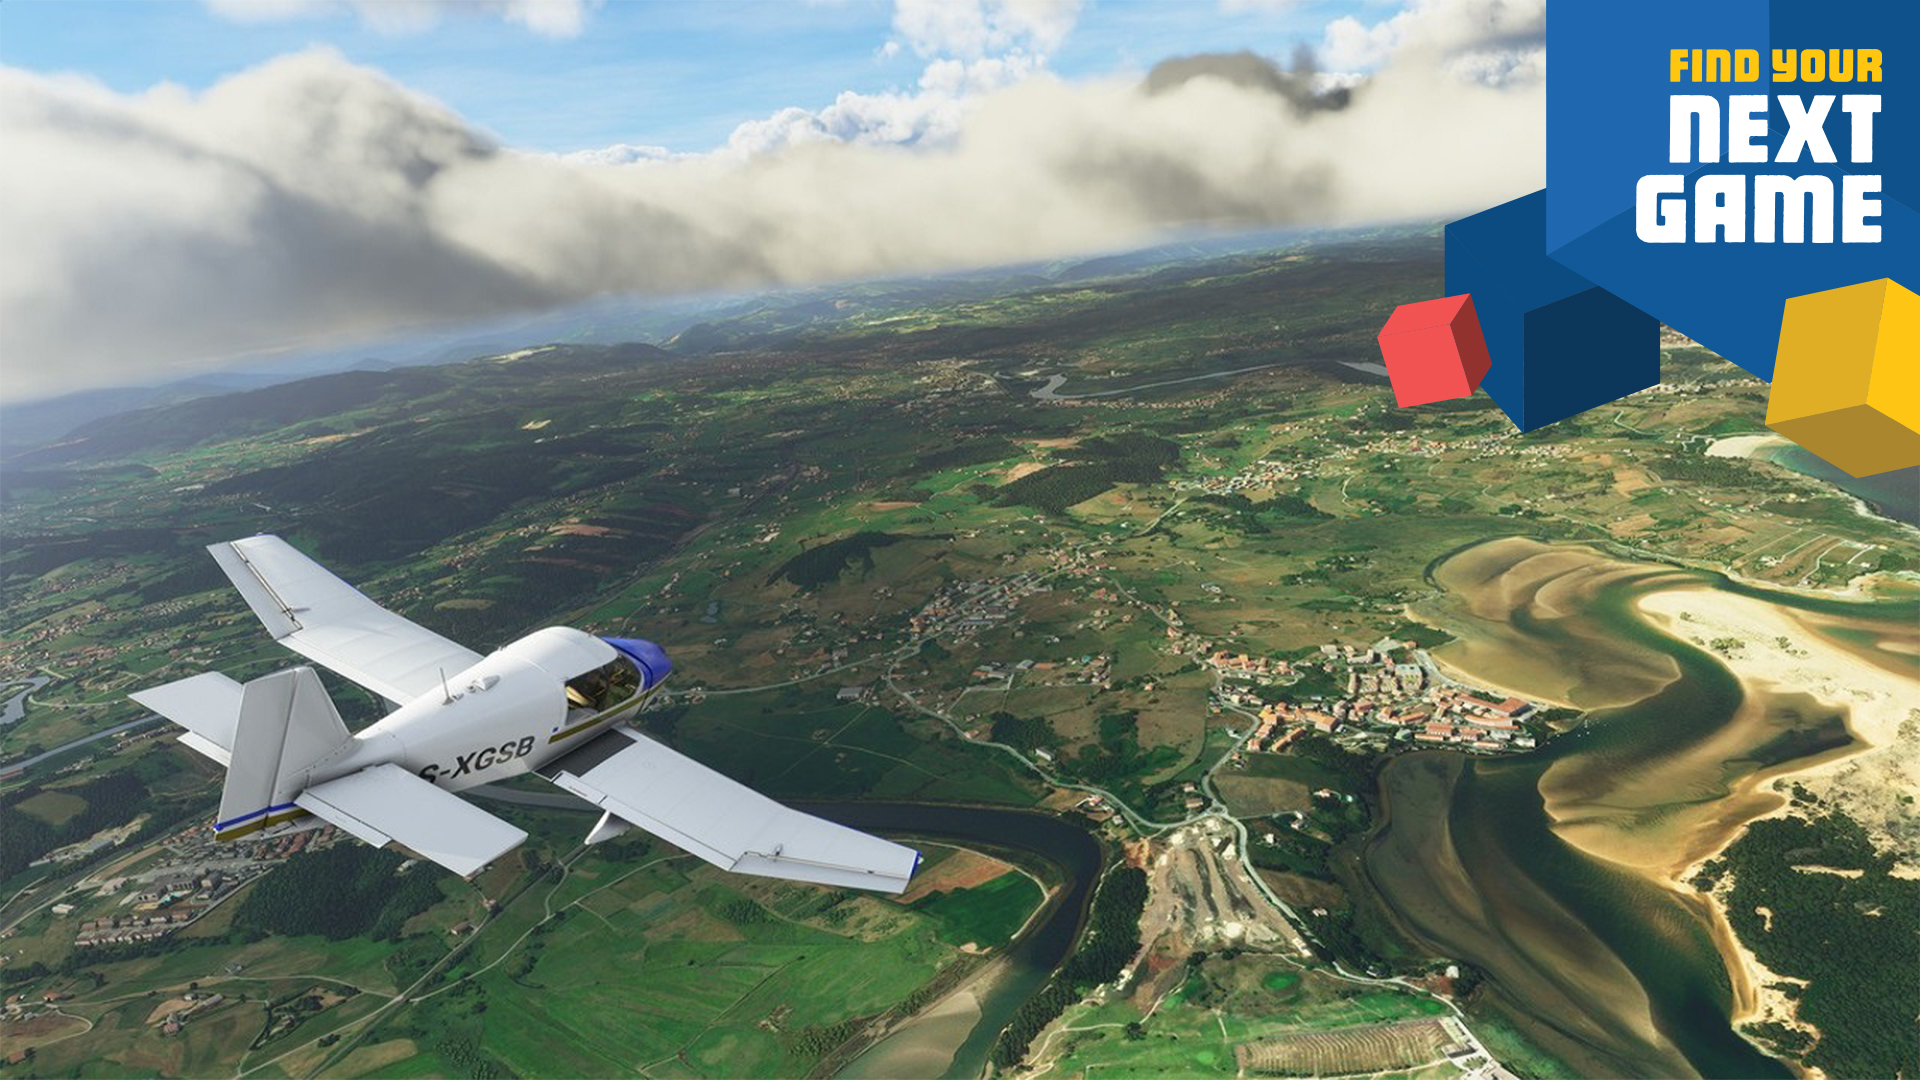 Microsoft Flight Simulator: The physical version will be held on 10 DVDs